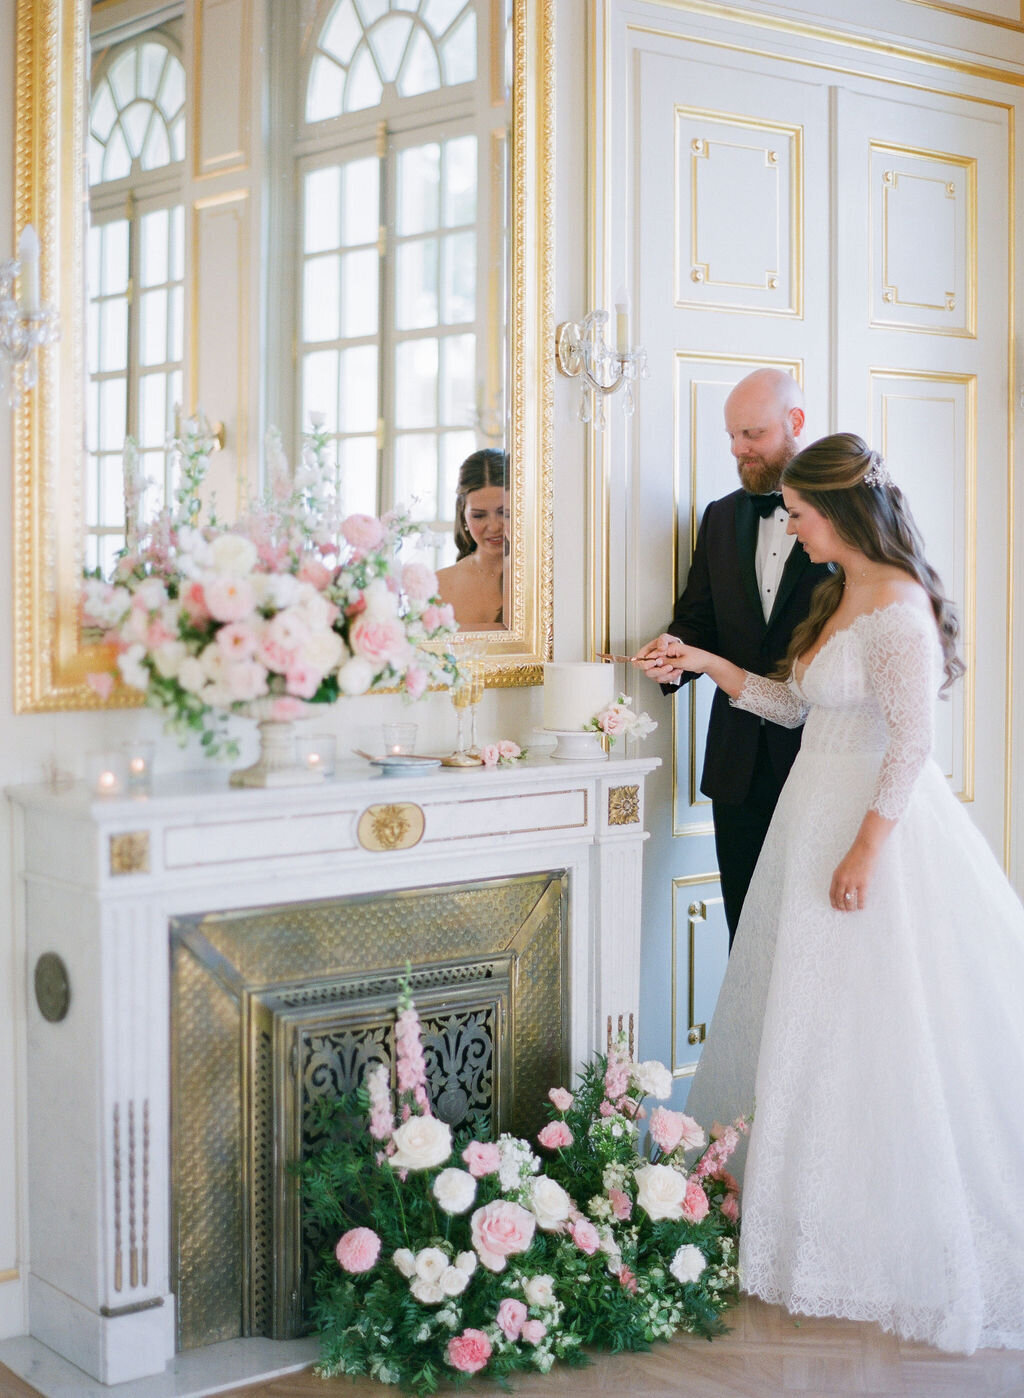 Jennifer Fox Weddings English speaking wedding planning & design agency in France crafting refined and bespoke weddings and celebrations Provence, Paris and destination Alyssa-Aaron-Wedding-Molly-Carr-Photography-First-Look-37